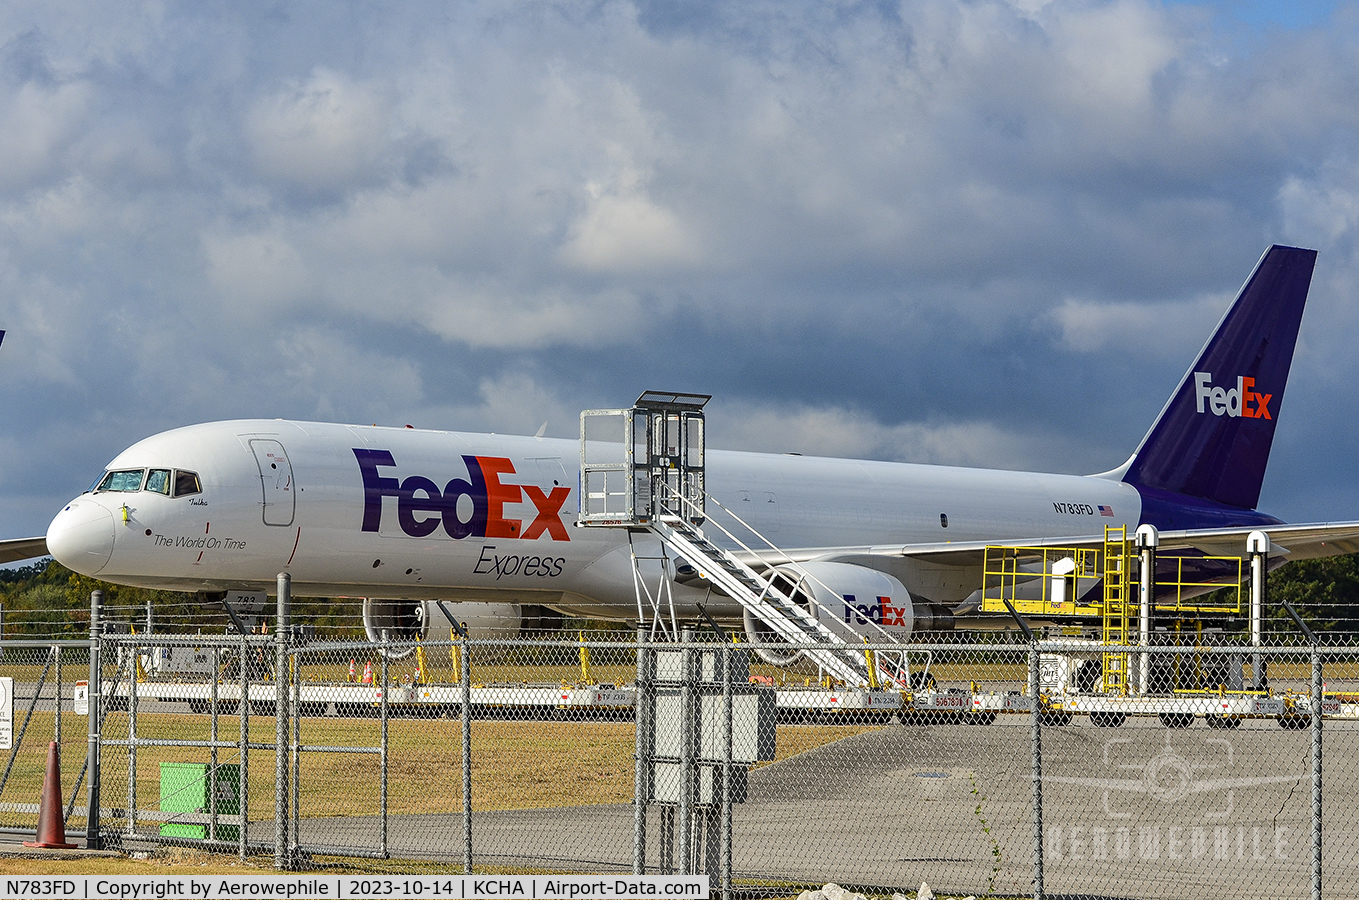 N783FD, 1992 Boeing 757-200(F) C/N 26678, FedEx 757 sitting at the FedEx facility at Chattanooga Airport.